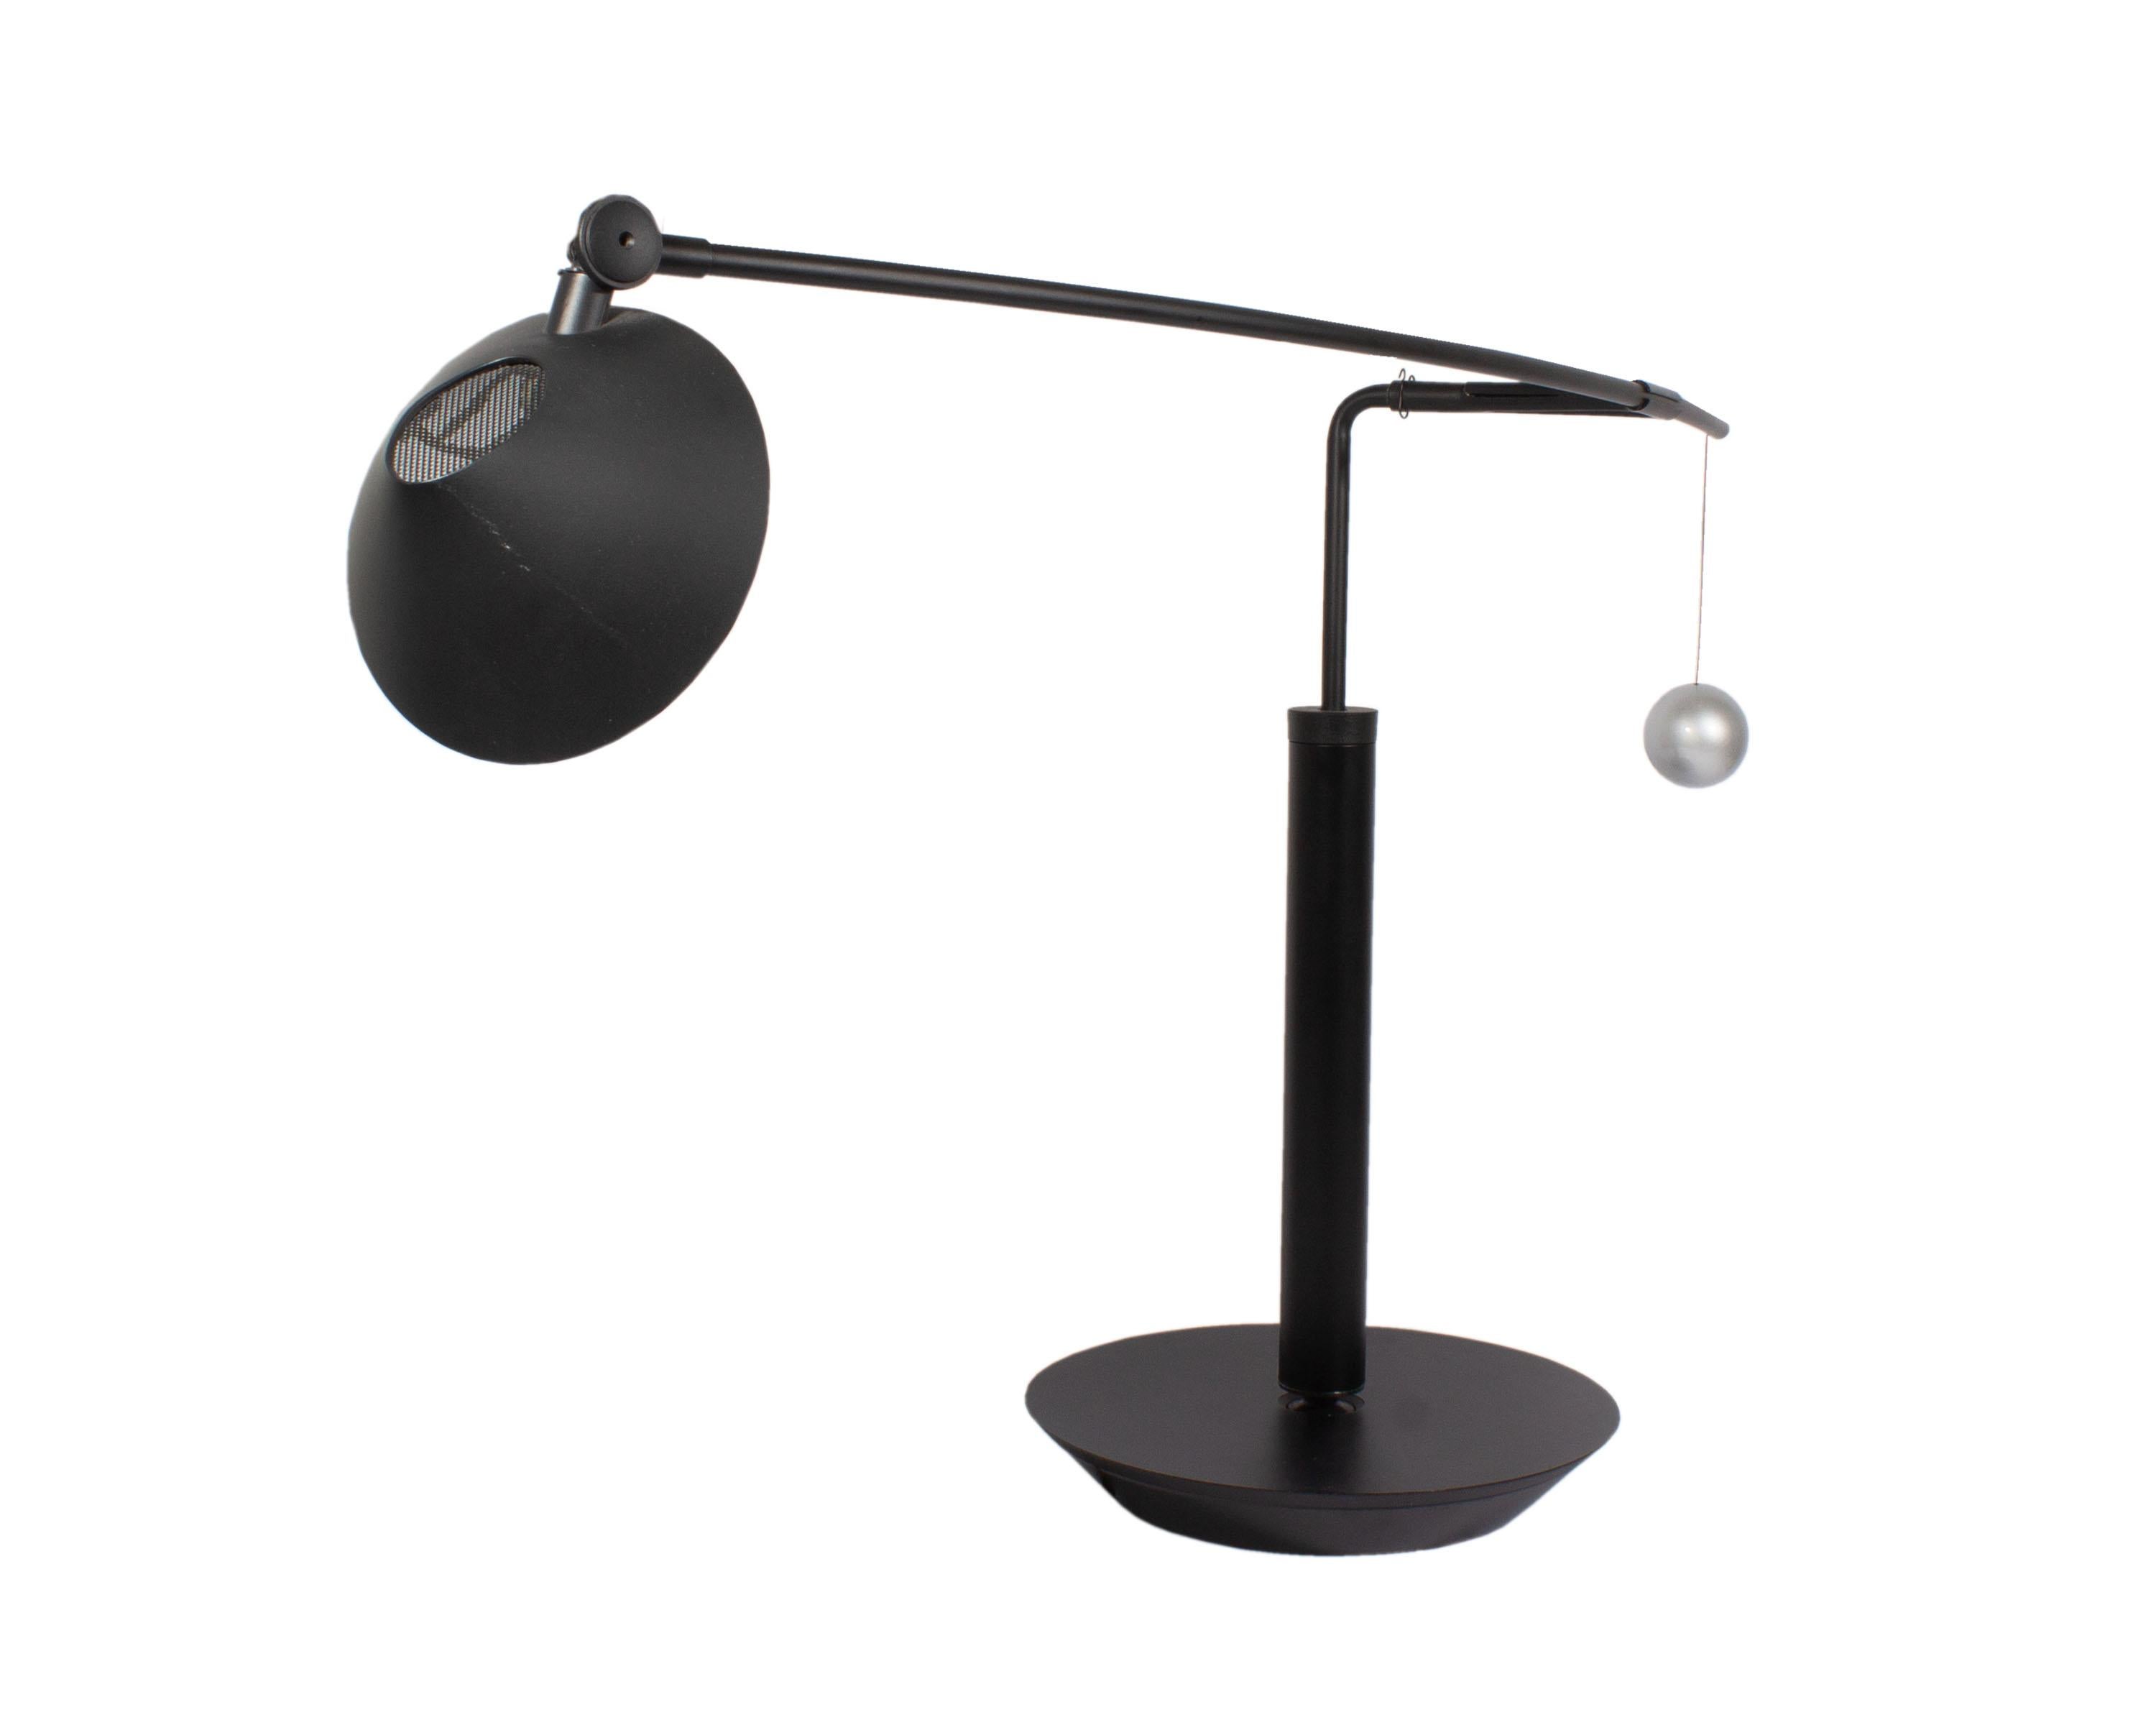 A Postmodern Nestore Lettura cantilever table lamp designed by Italian designer Carlo Forcolini (born 1947) for Artemide. Designed in 1989, the black matte lamp features a round, moveable plastic shade that covers a single socket. The shade is